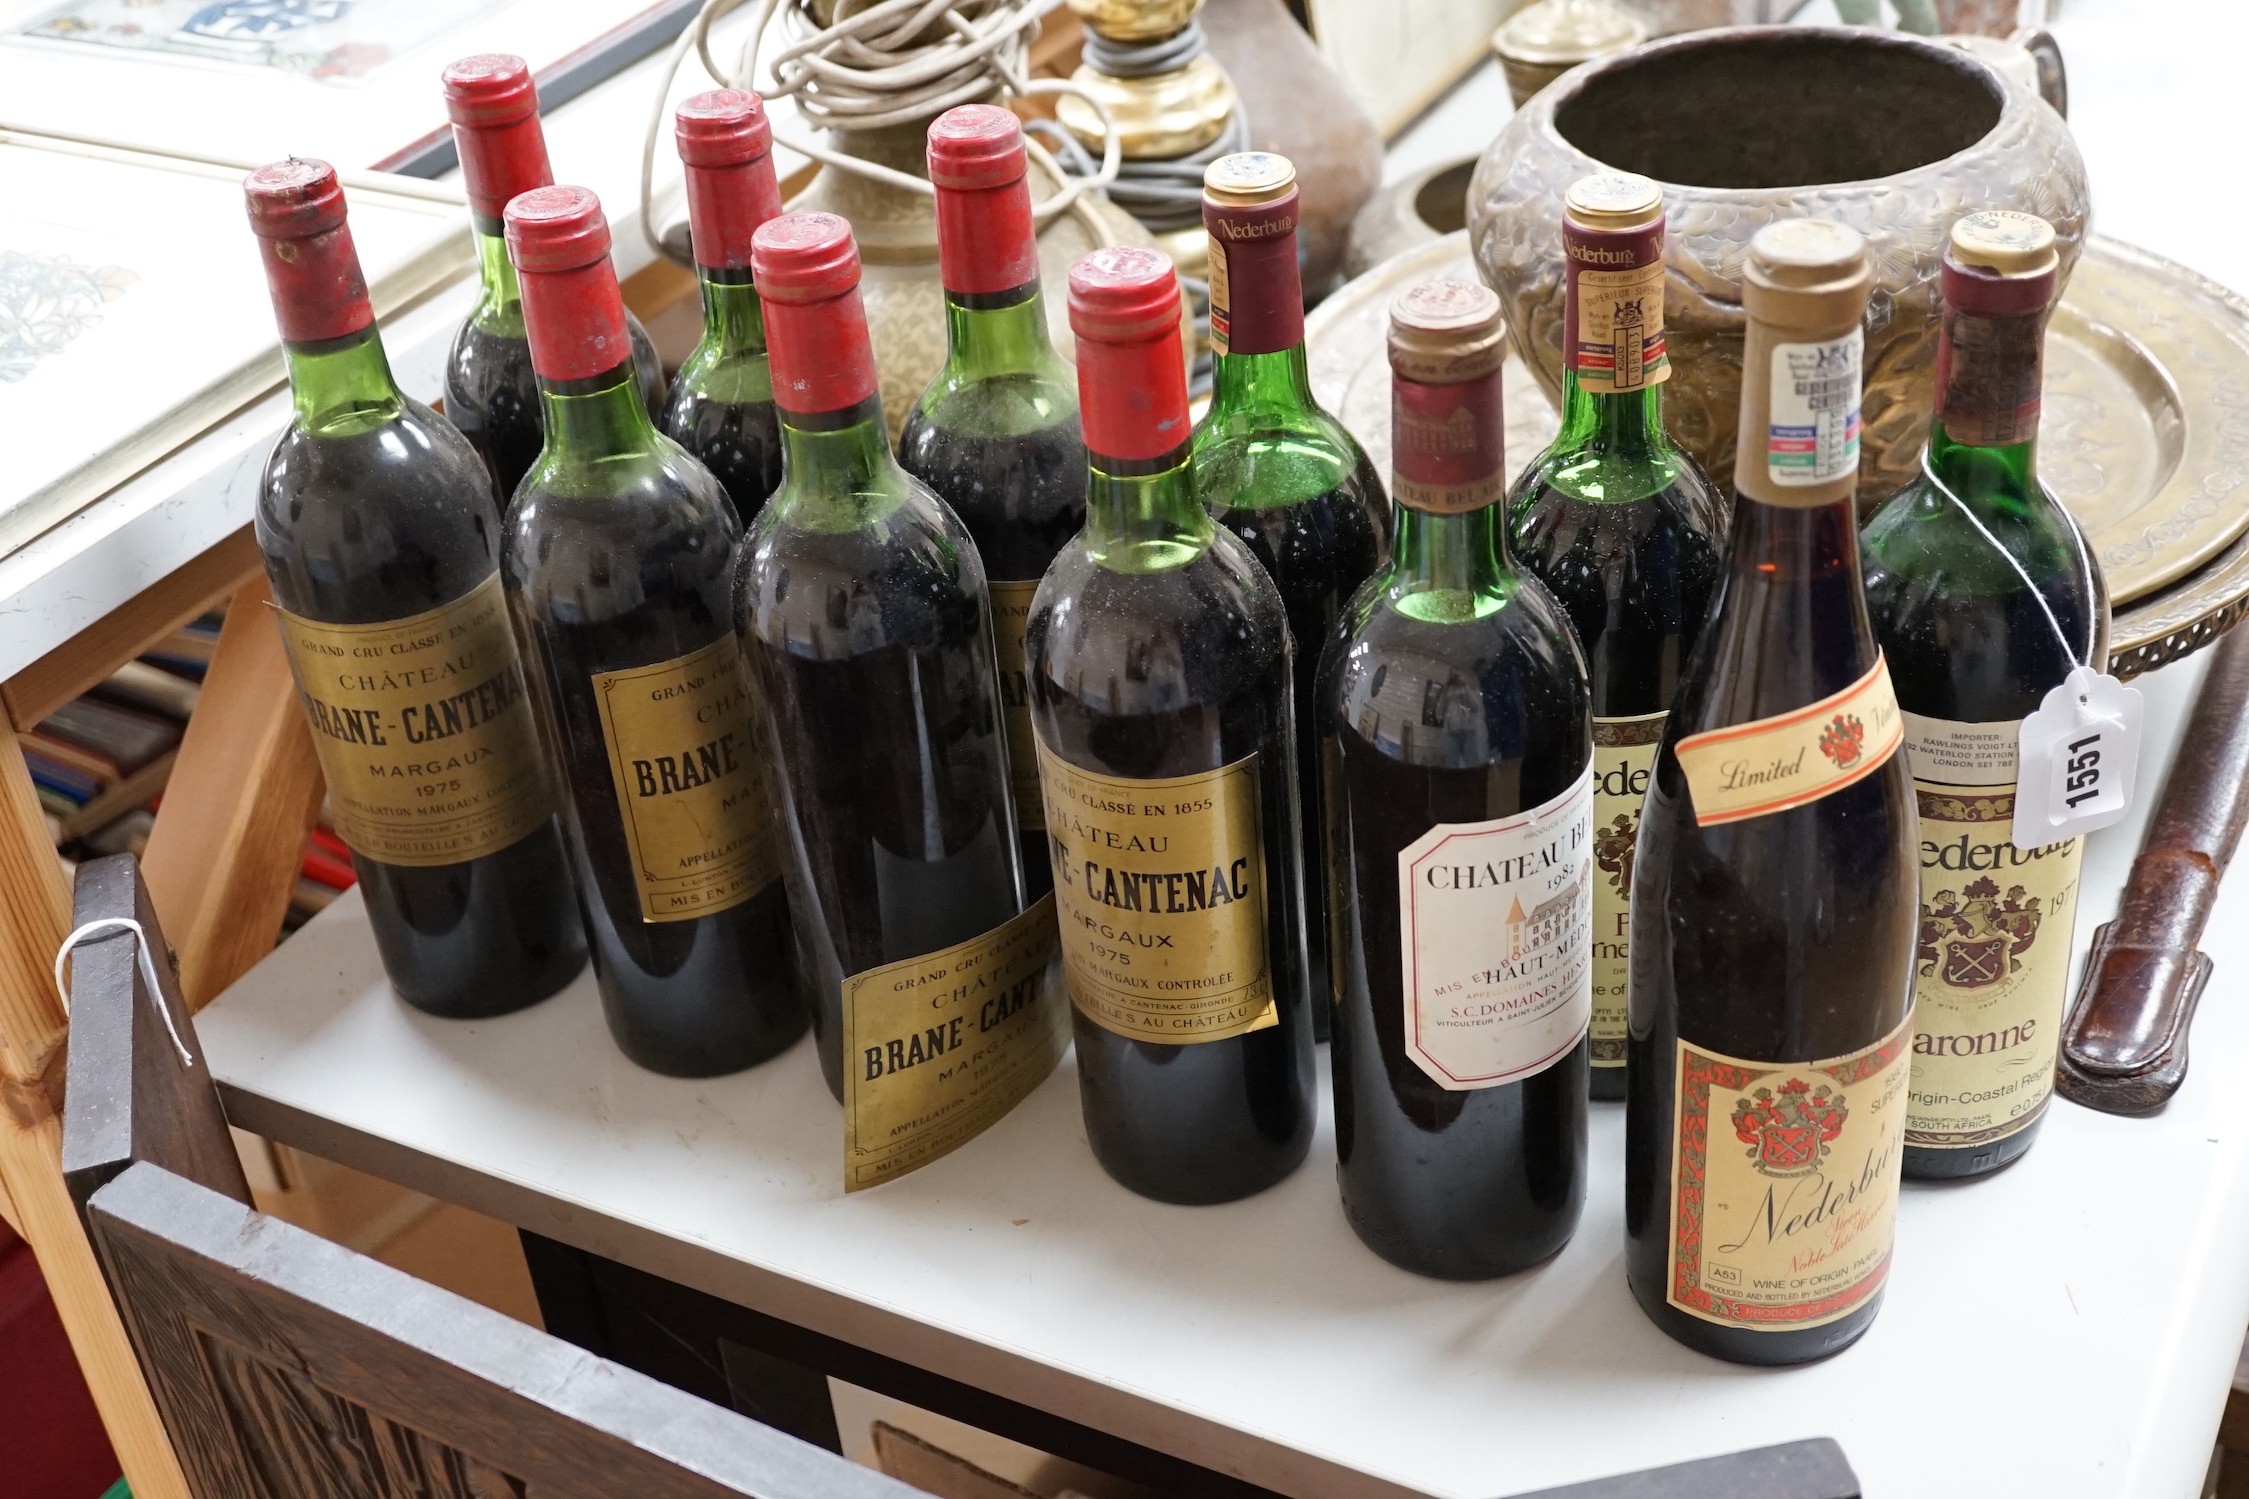 Seven bottles of 75cl 1975 Chateau Brane-Cantenac Margaux, together with a bottle of 75cl 1982 Chateau Bel Air Haut-Medoc and four bottles of 75cl Nederburg; two 1981 Paarl Cabernet Sauvignon, one 1977 Baronne and one bo